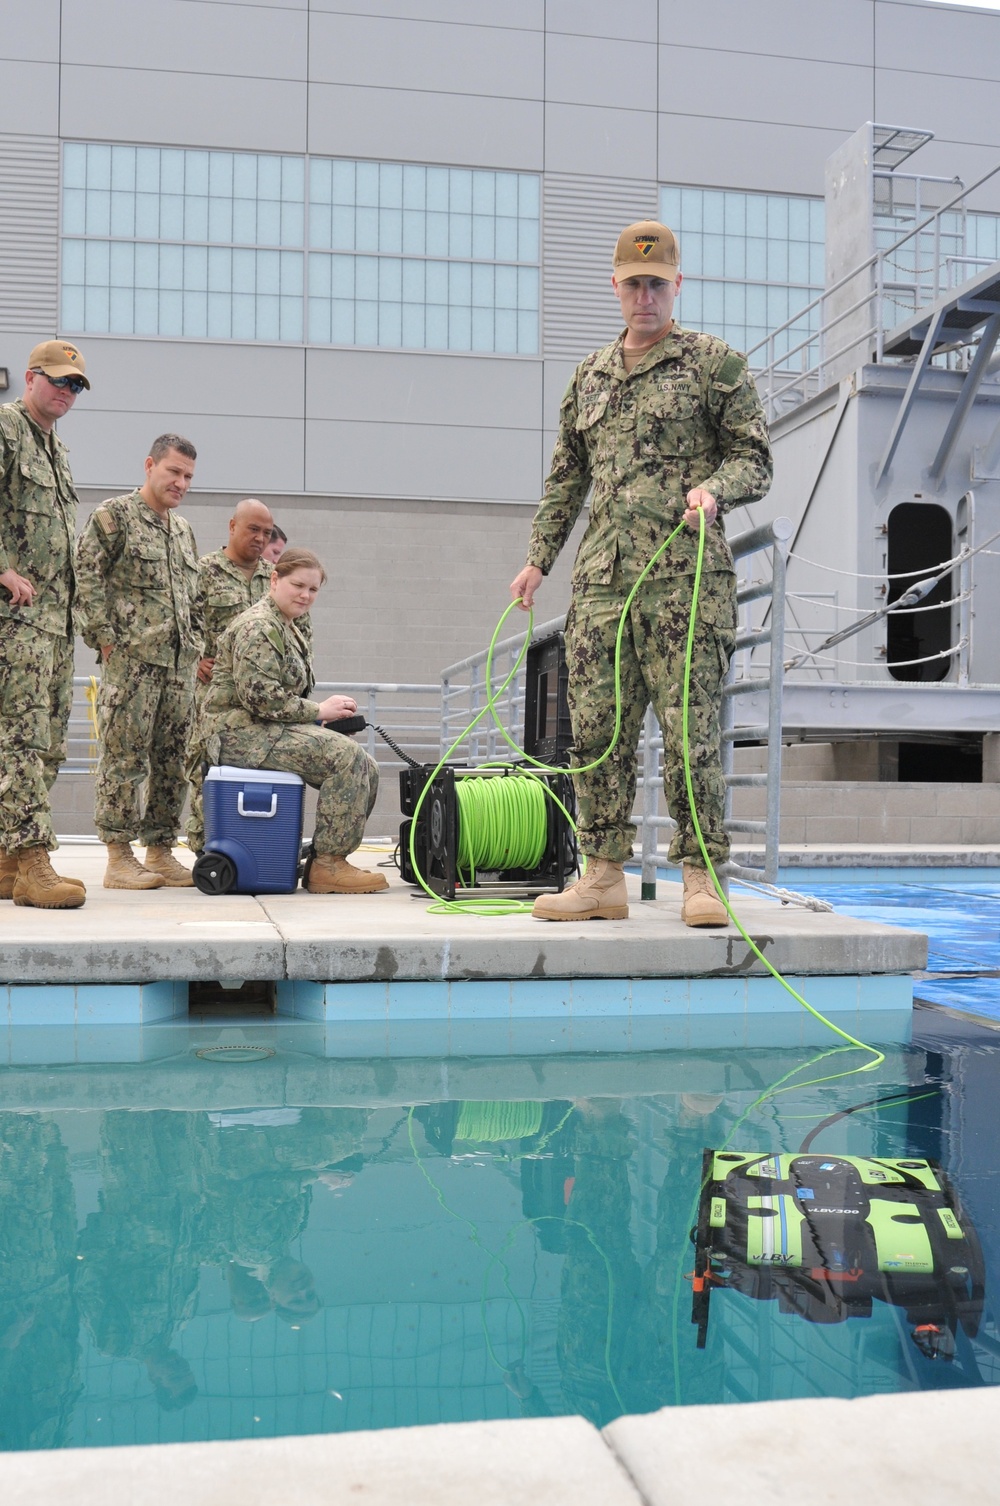 SPAWAR Reserve Sailors Assigned to the Unmanned Maritime Vehicle Team Trains with Naval Information Warfare Center Pacific’s for Maritime Operations